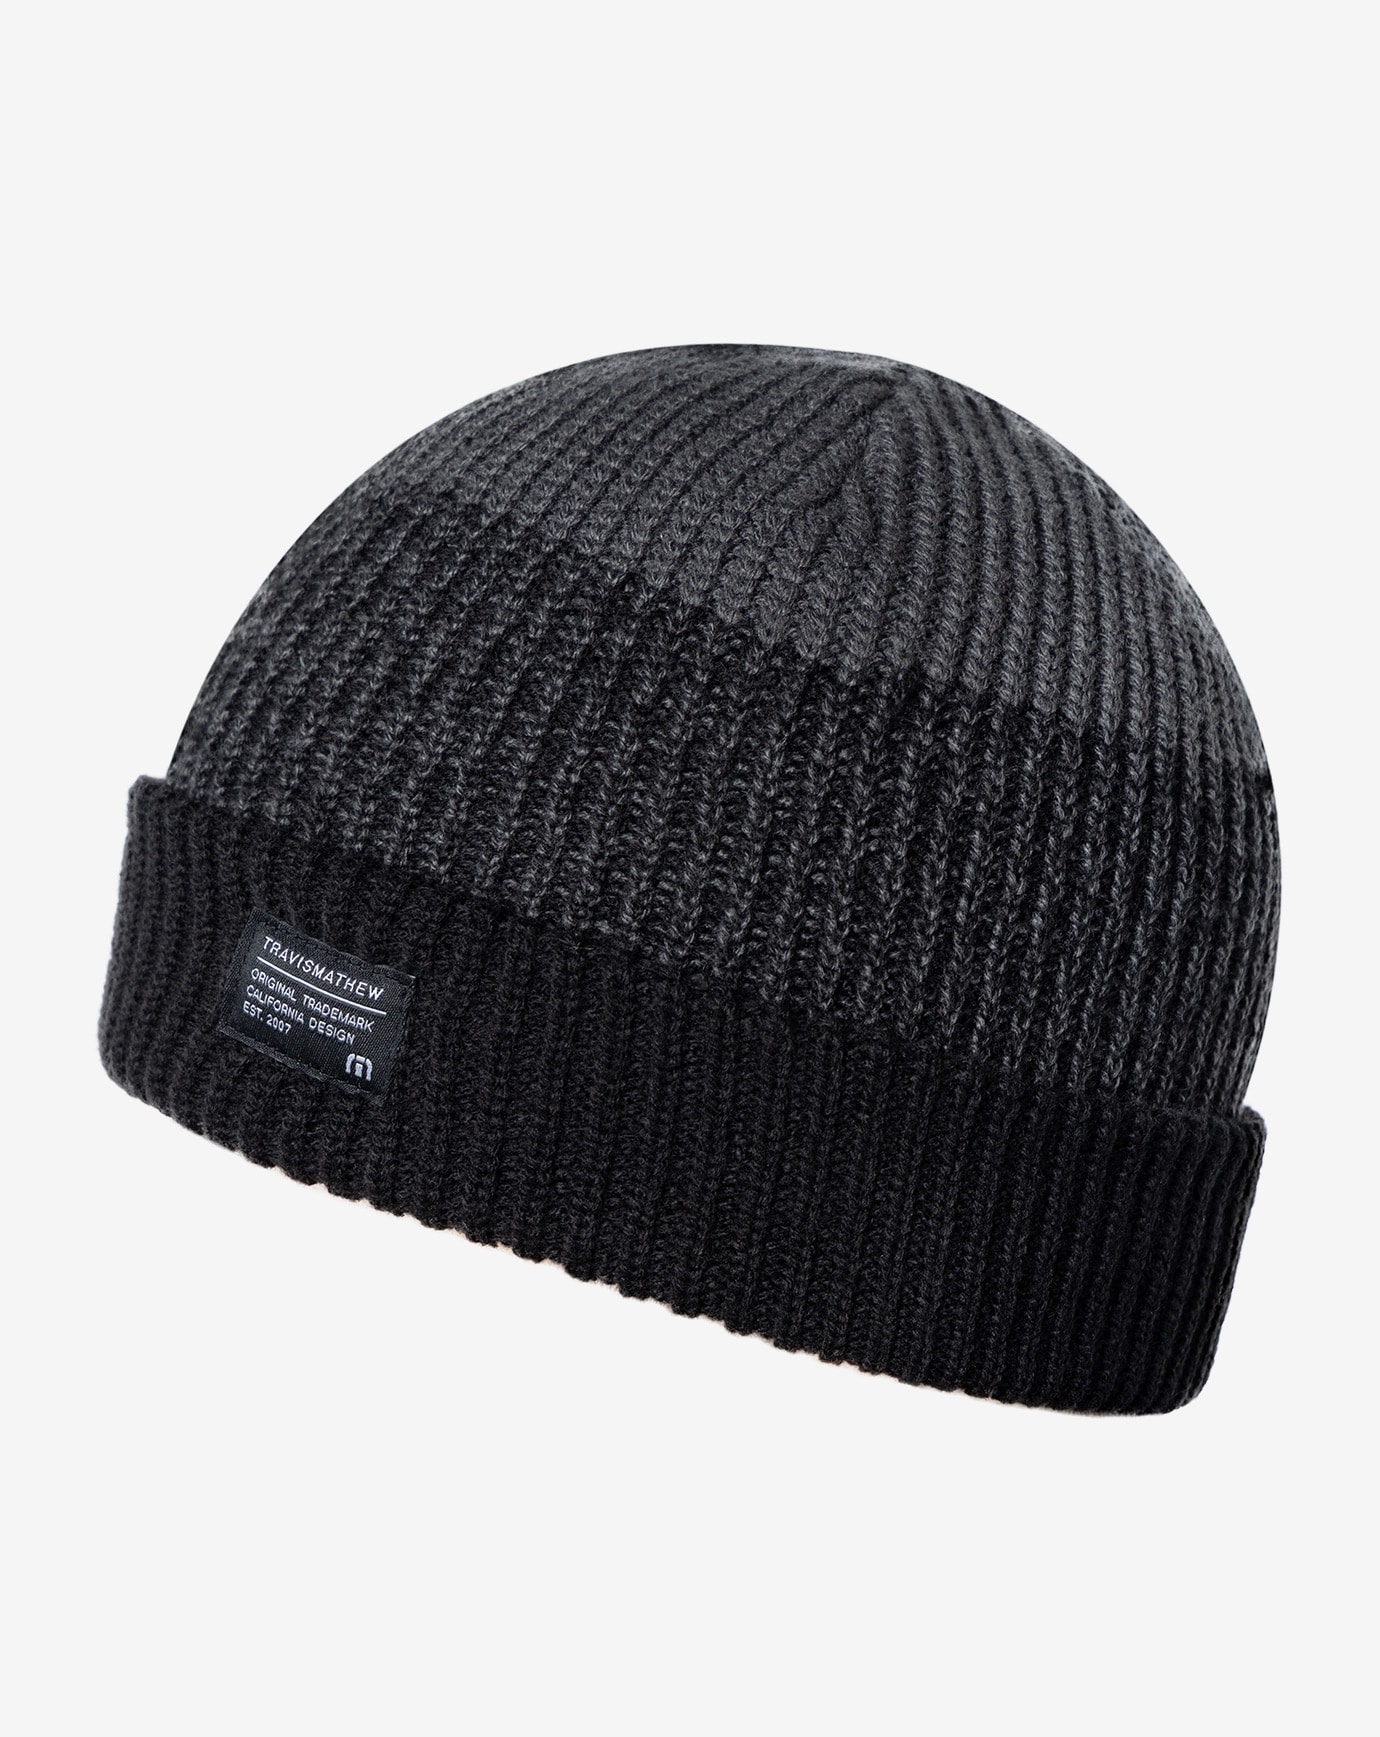 PREVAILING WINDS BEANIE Image Thumbnail 2